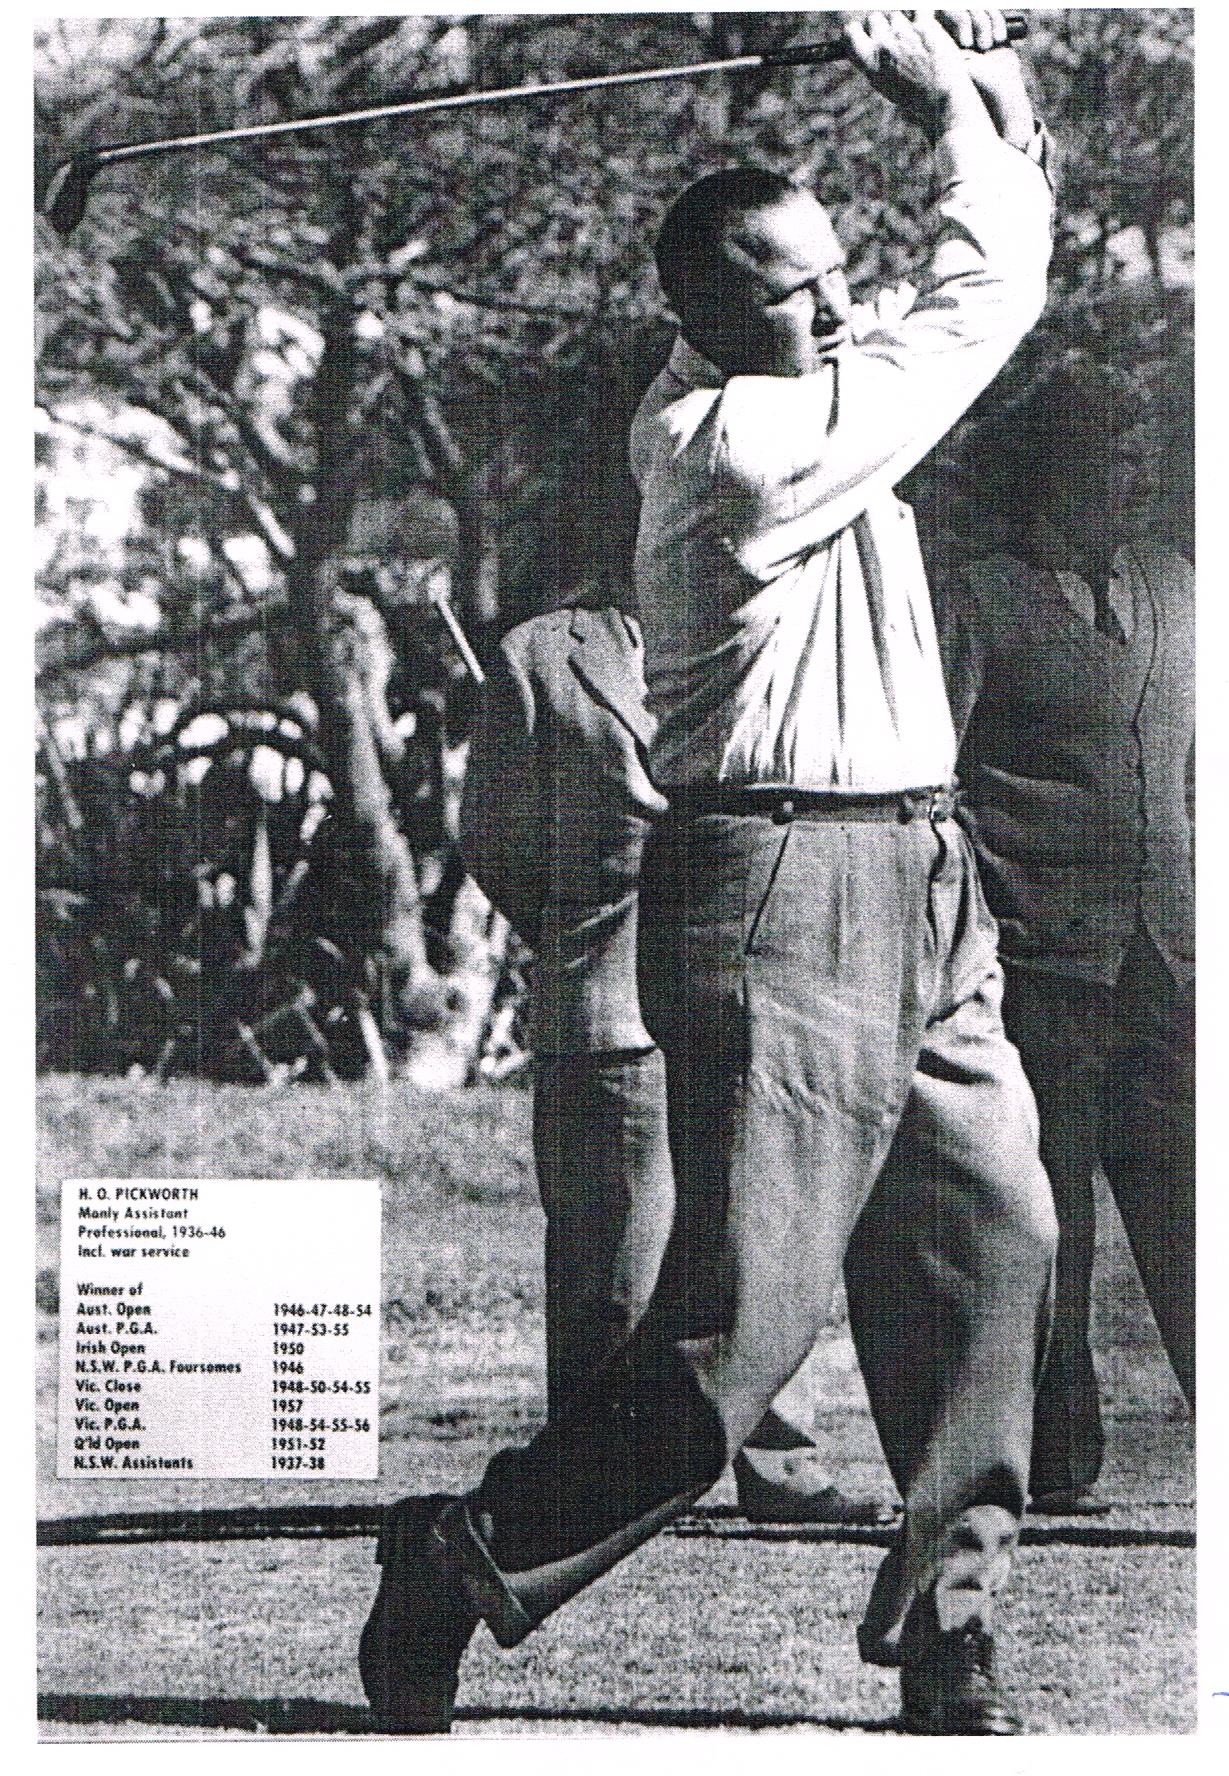 Ossie Pickworth at Manly Golf Club